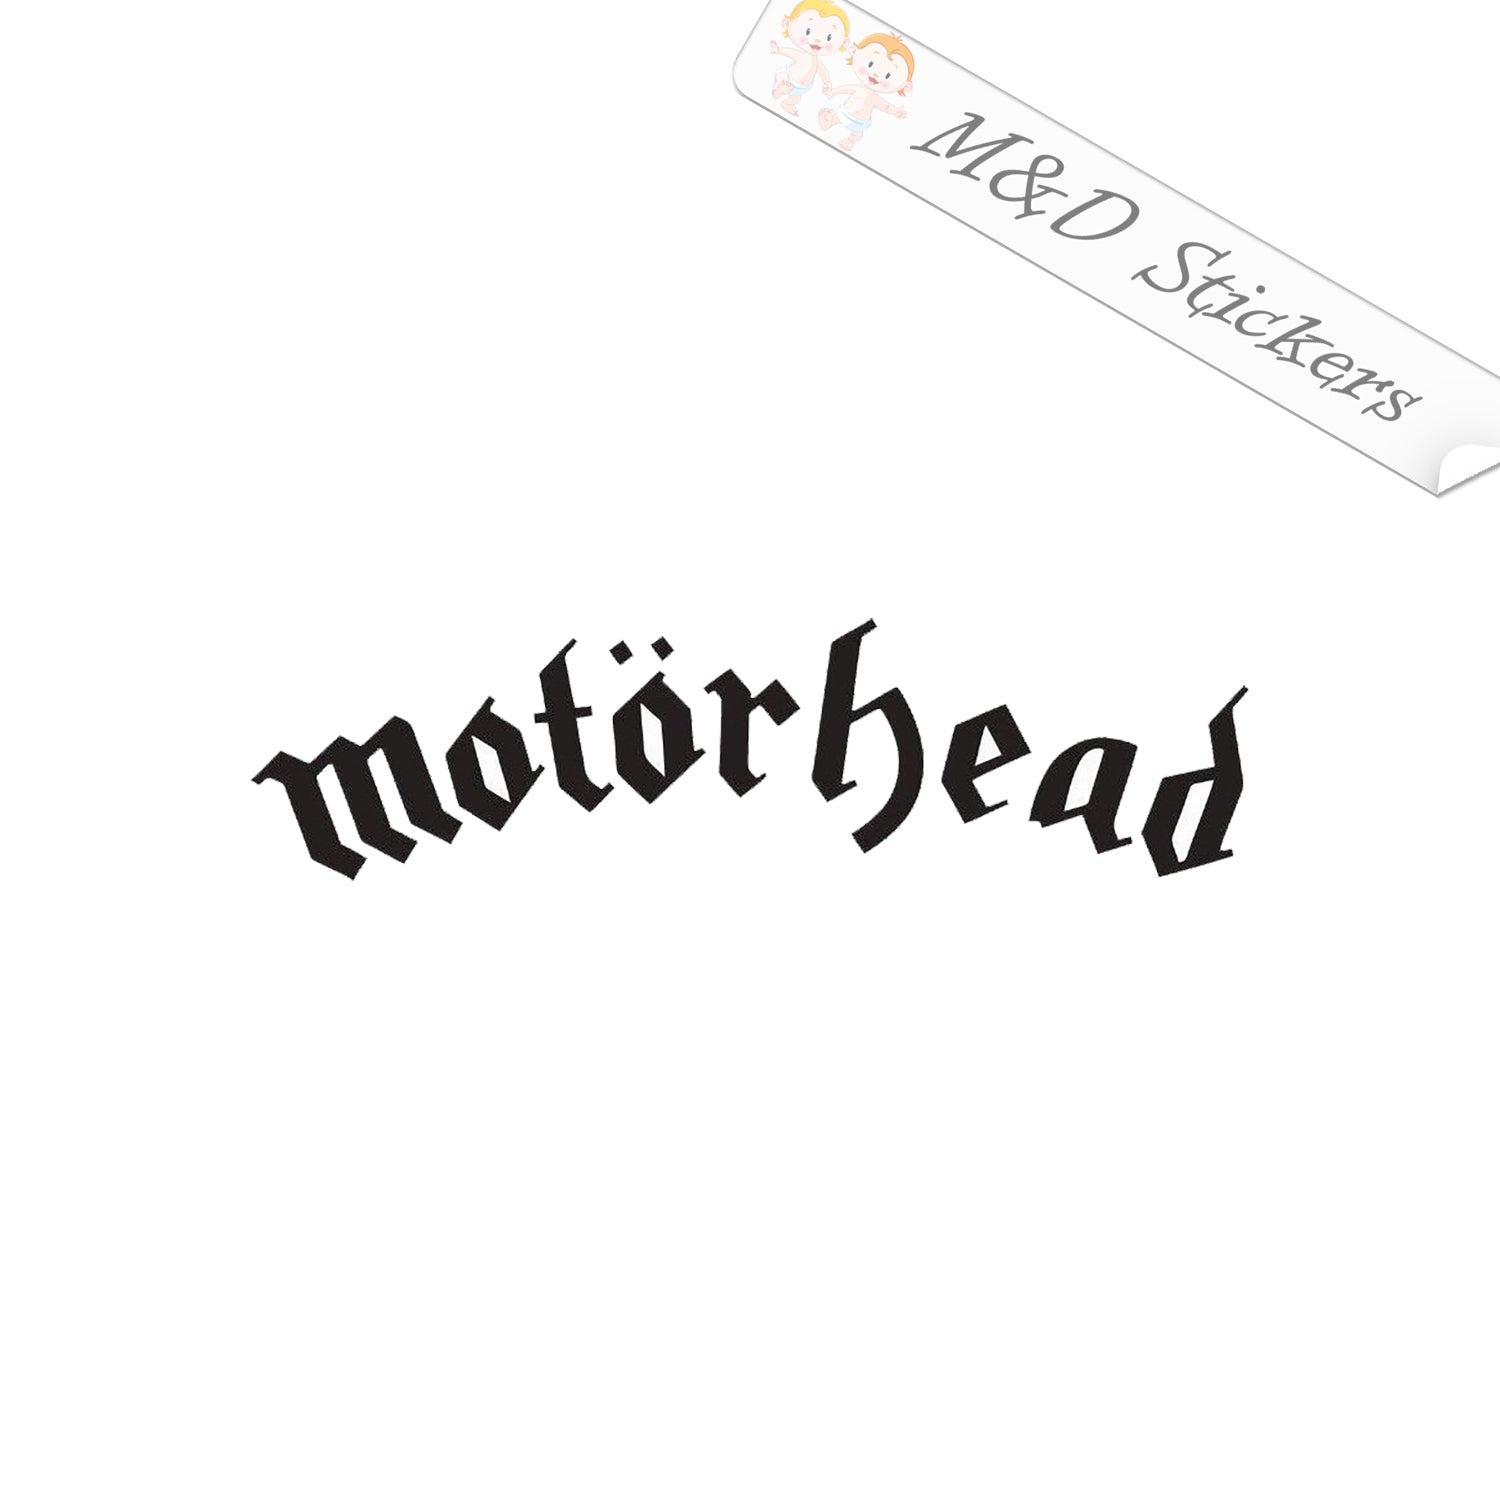 Motörhead Music band Logo (4.5 - 30) Vinyl Decal in Different colors – M&D  Stickers